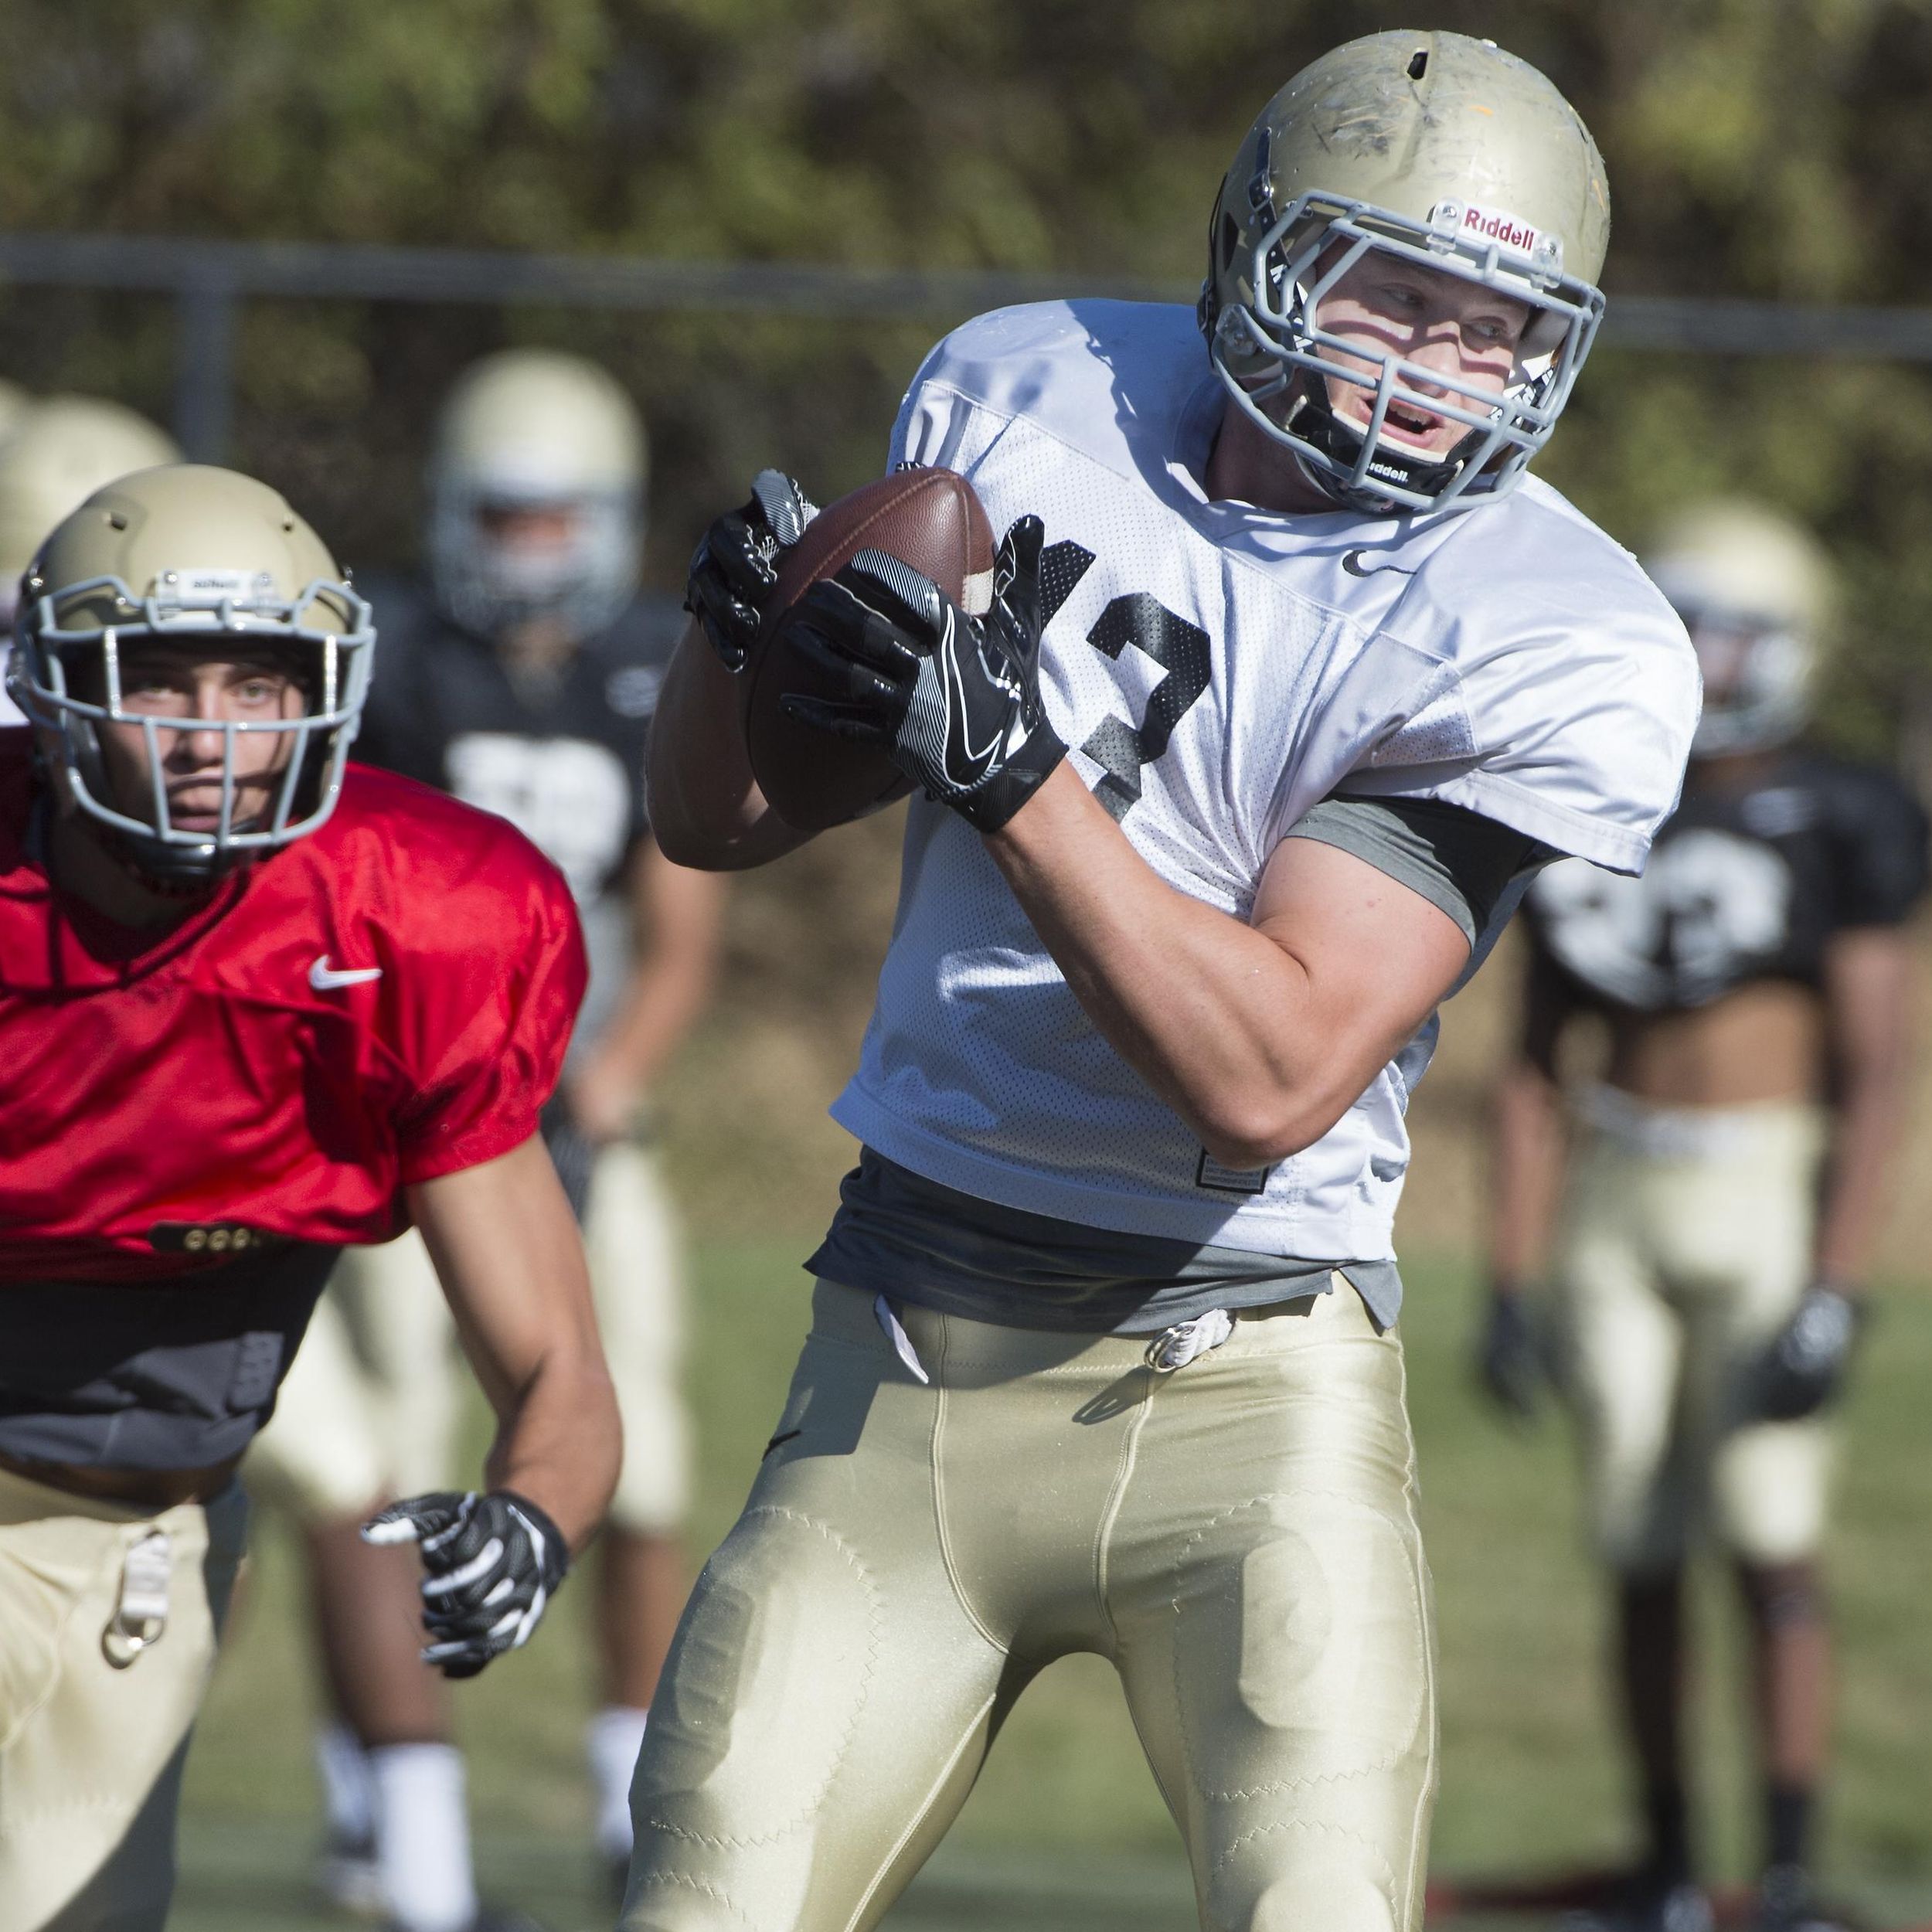 Idaho's Trent Cowan was born and raised to play football for Vandals